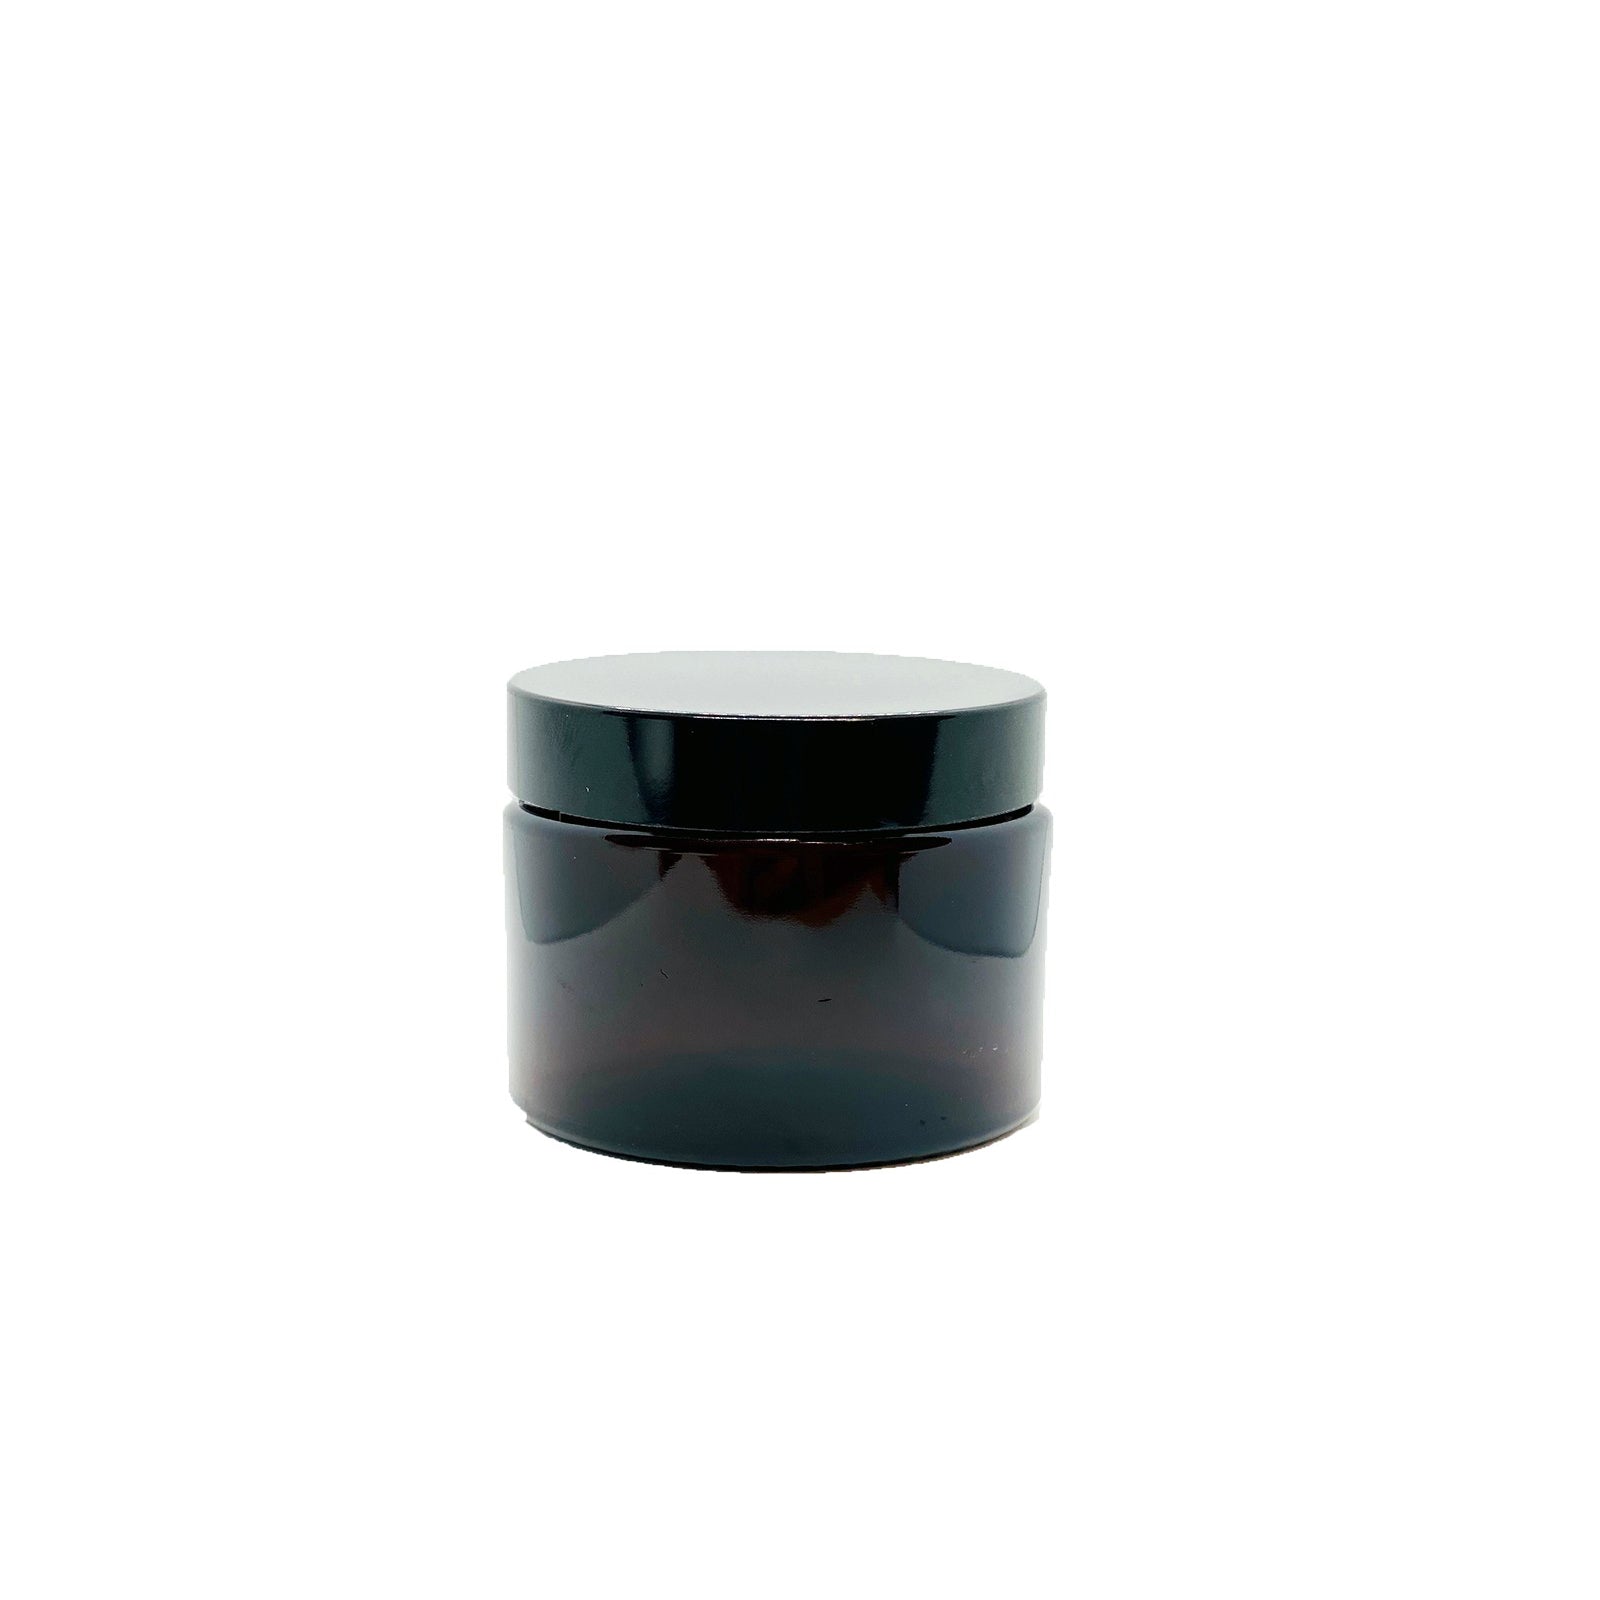 Glass Containers for Cosmetic Storage with Cap 5ml-250ml